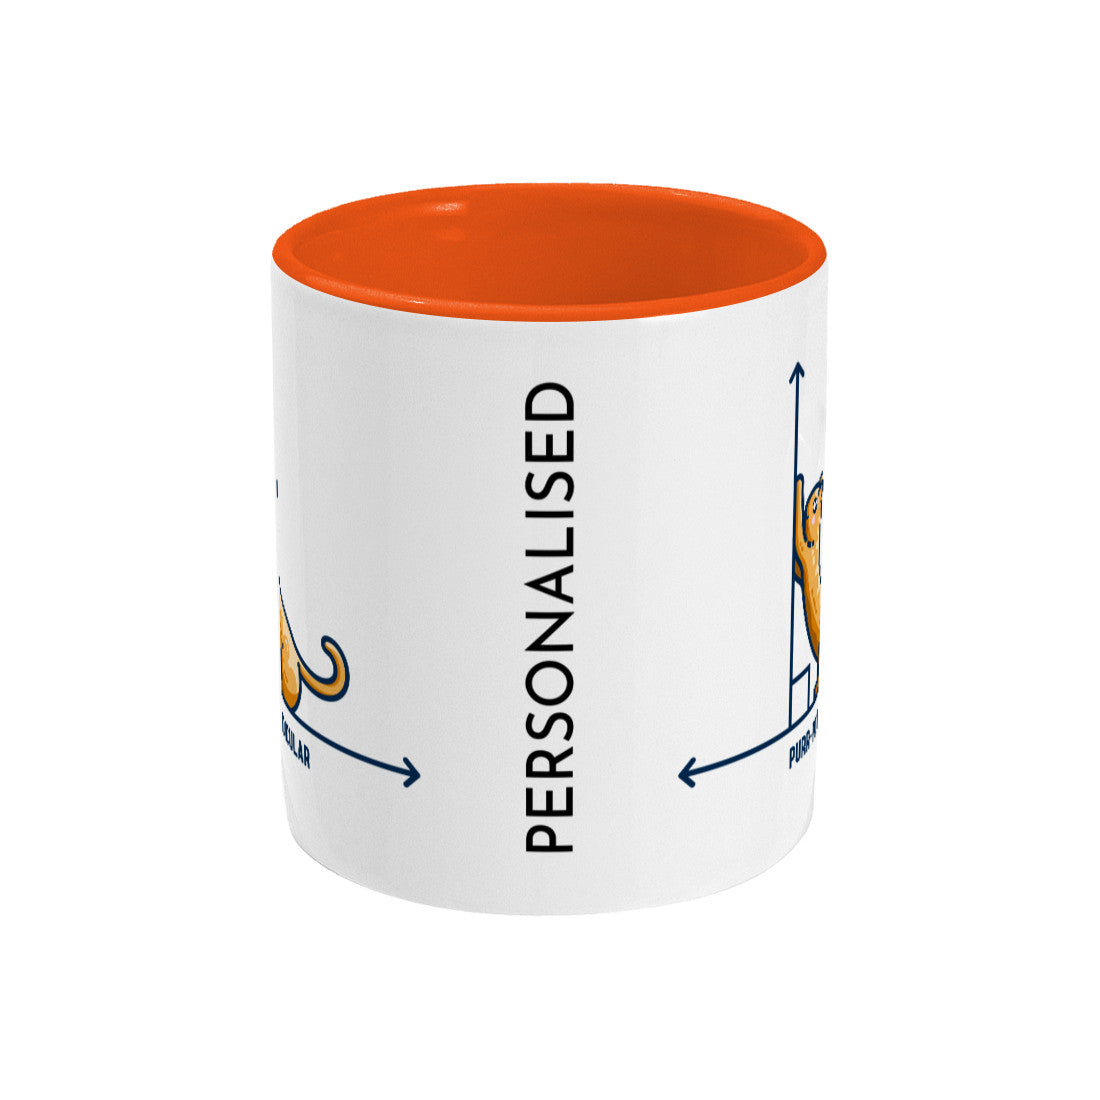 A white ceramic mug with an orange inside, the handle around the back not visible, the edge of the design visible at the left and right edges of the mug with the word personalised printed vertically between them.